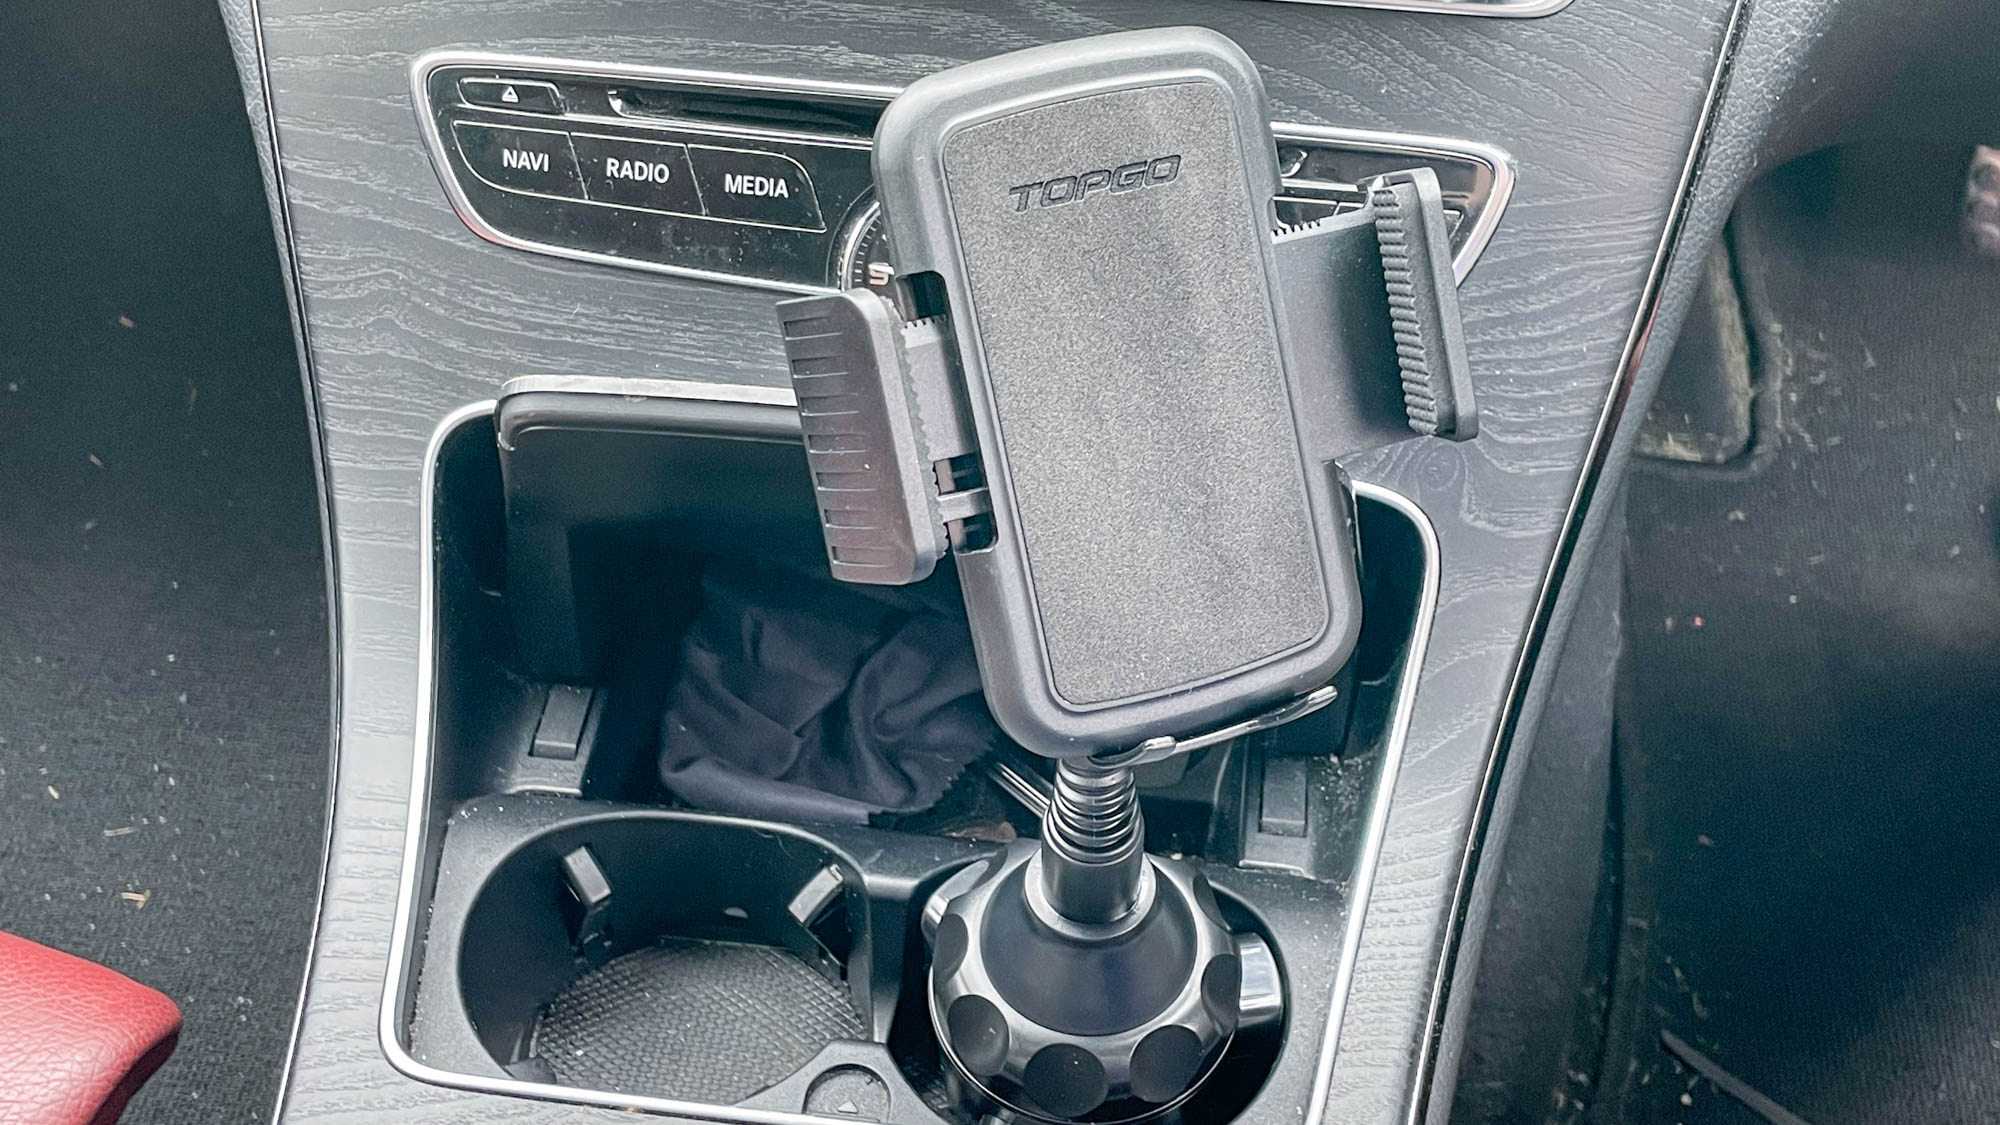 TOPGO Cup Holder Phone Mount review